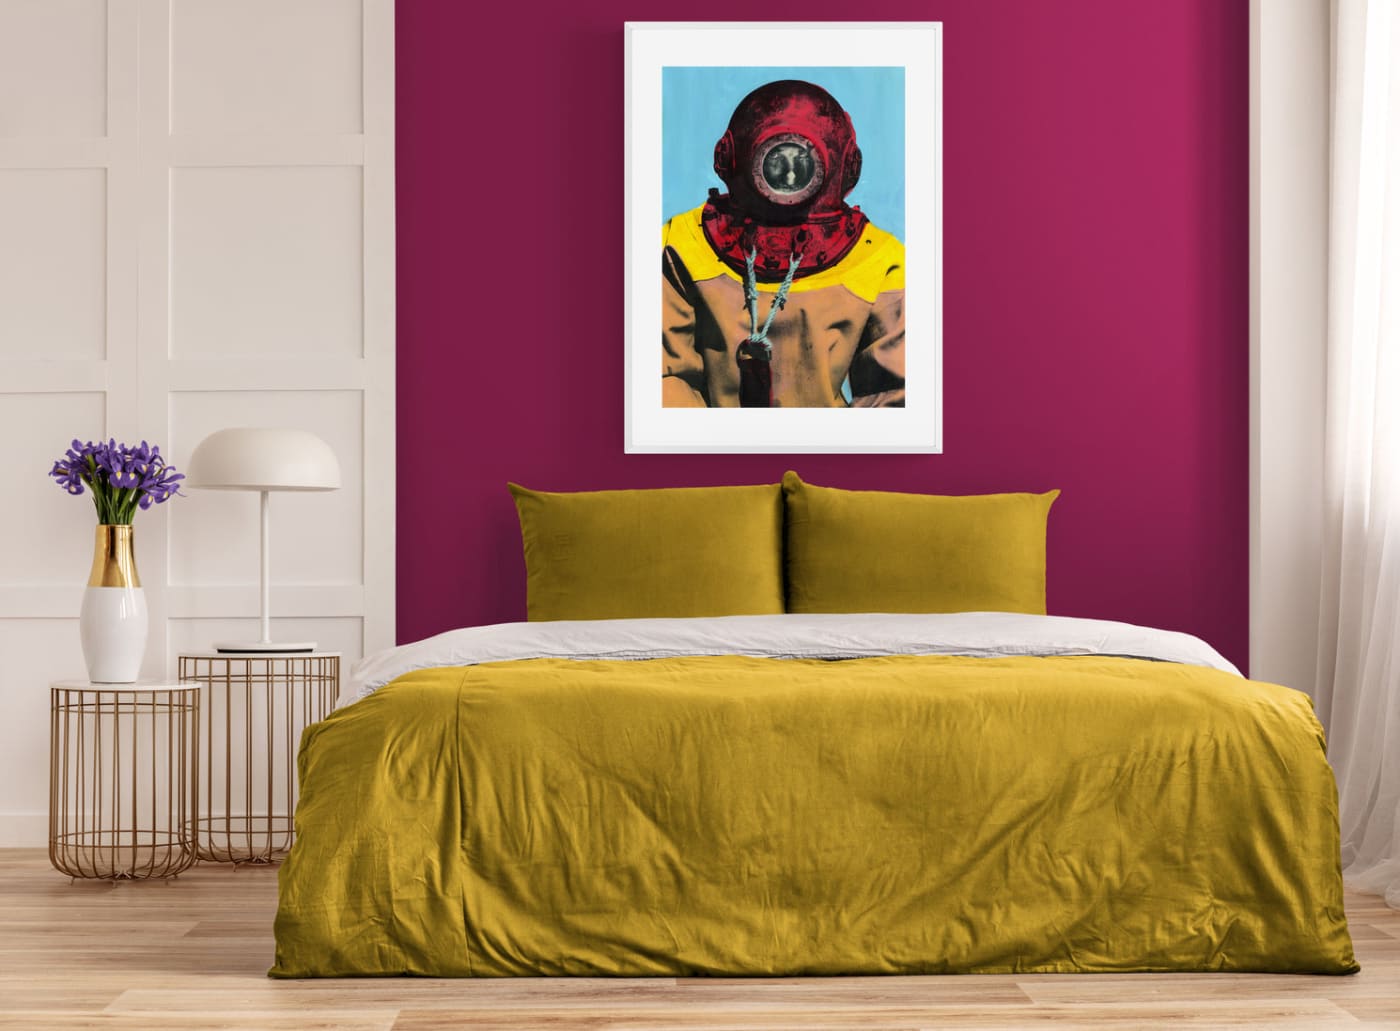 Painting Pop Art Wall Art from Greece | Baby blue & red sponge diver from Kalymnos island, by George Tatakis - inside a pop bedroom